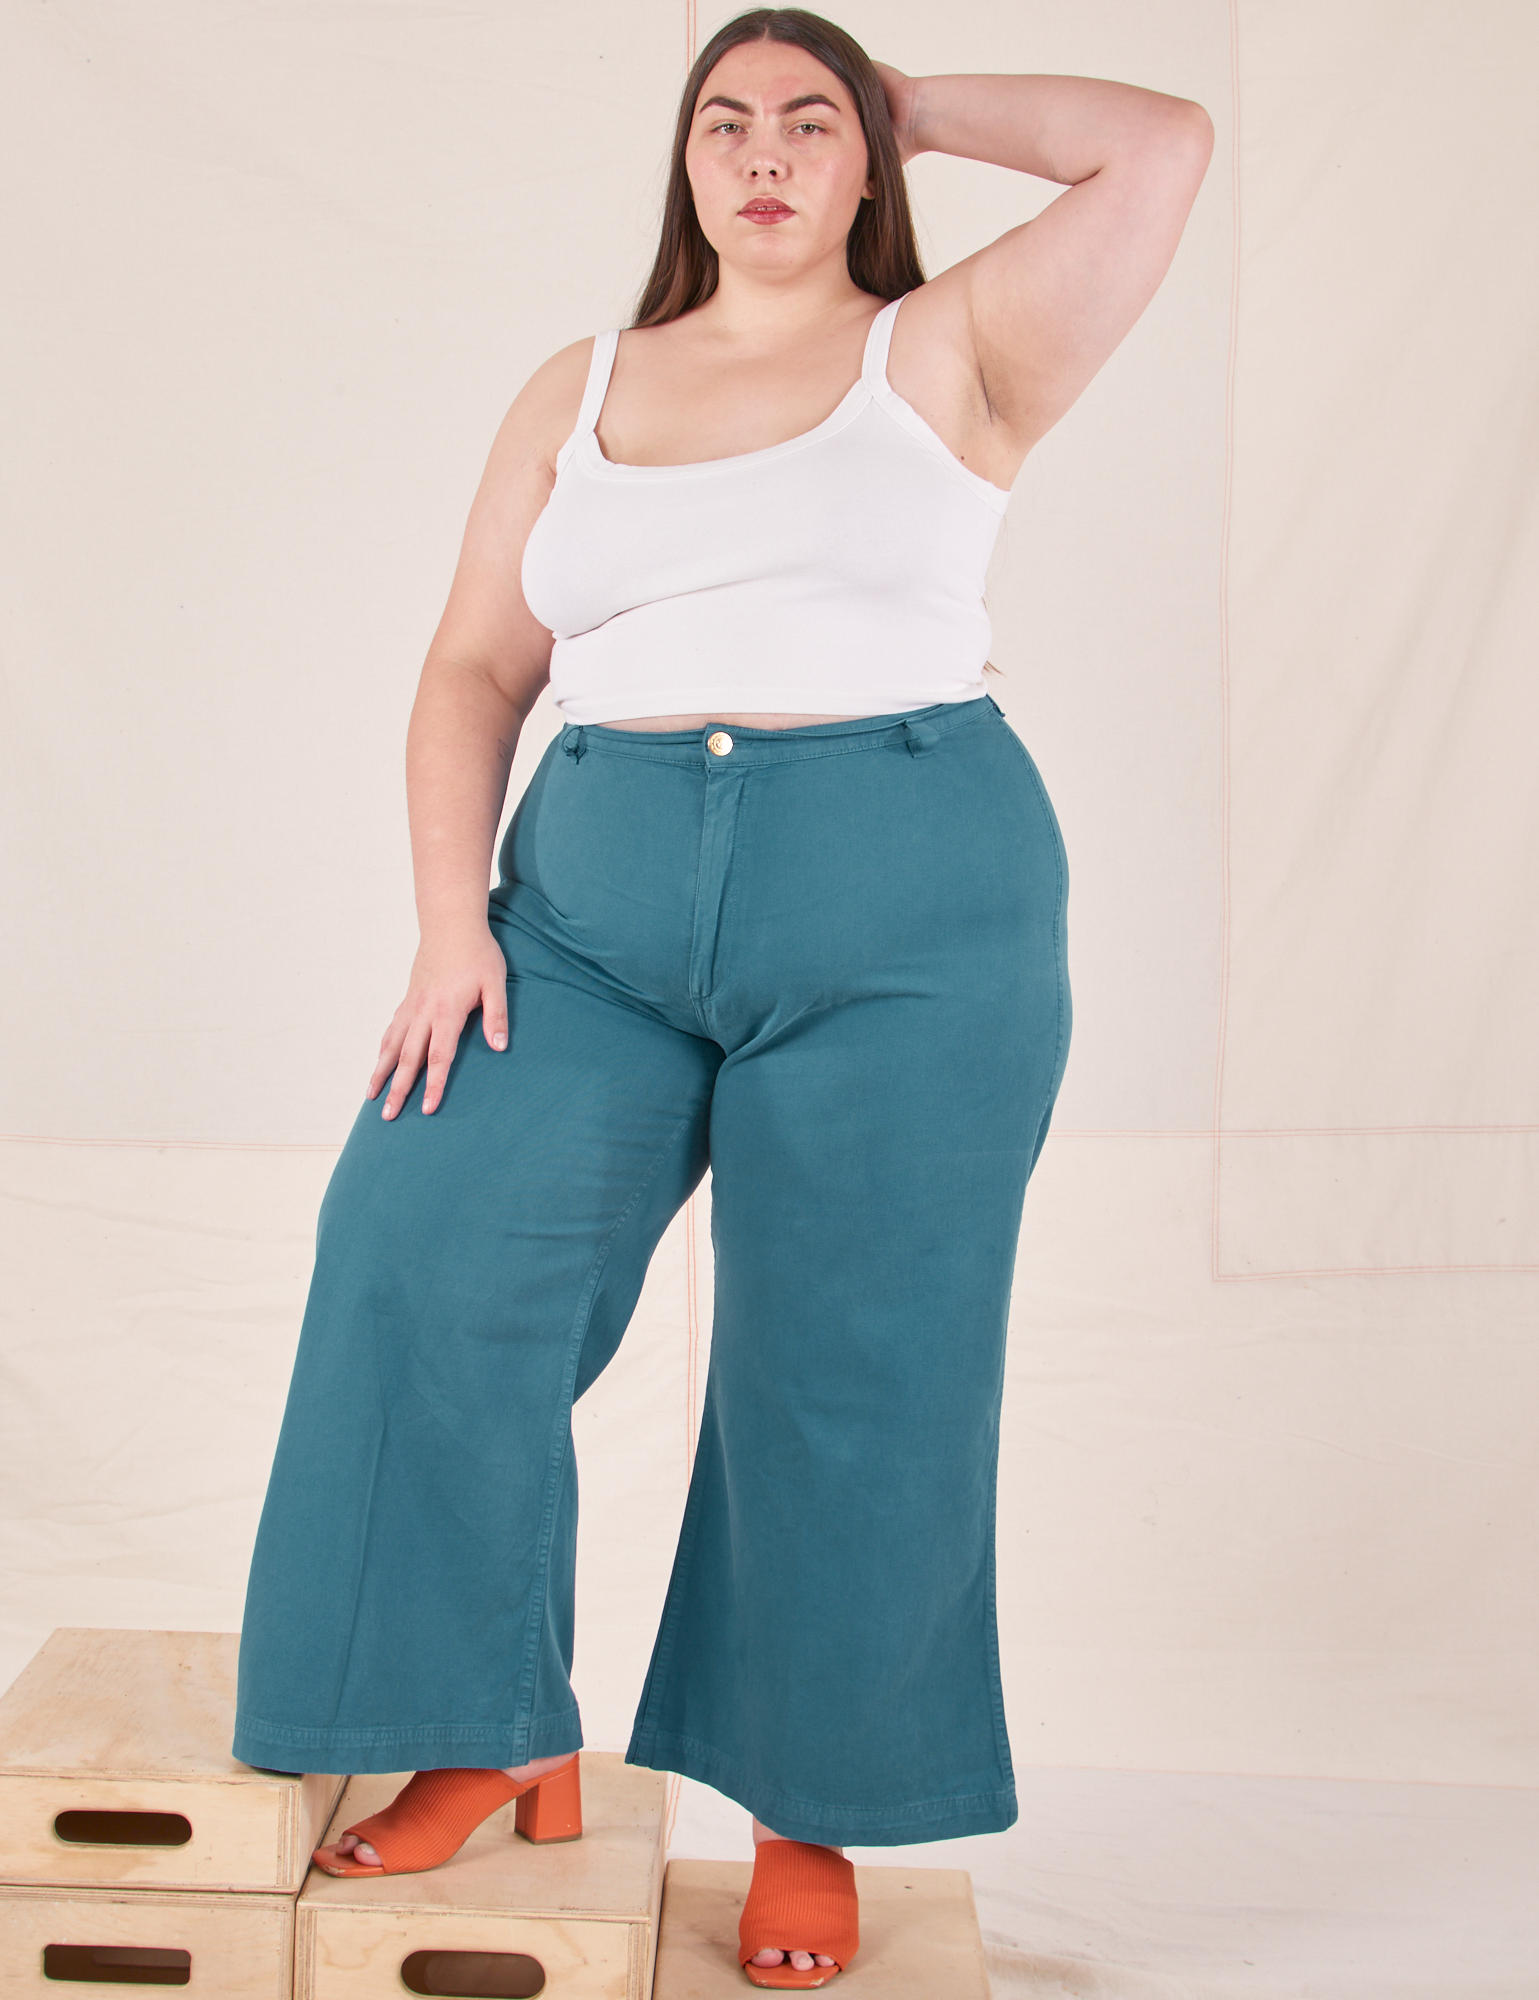 Marielena is wearing Bell Bottoms in Marine Blue and vintage off-white Cropped Cami